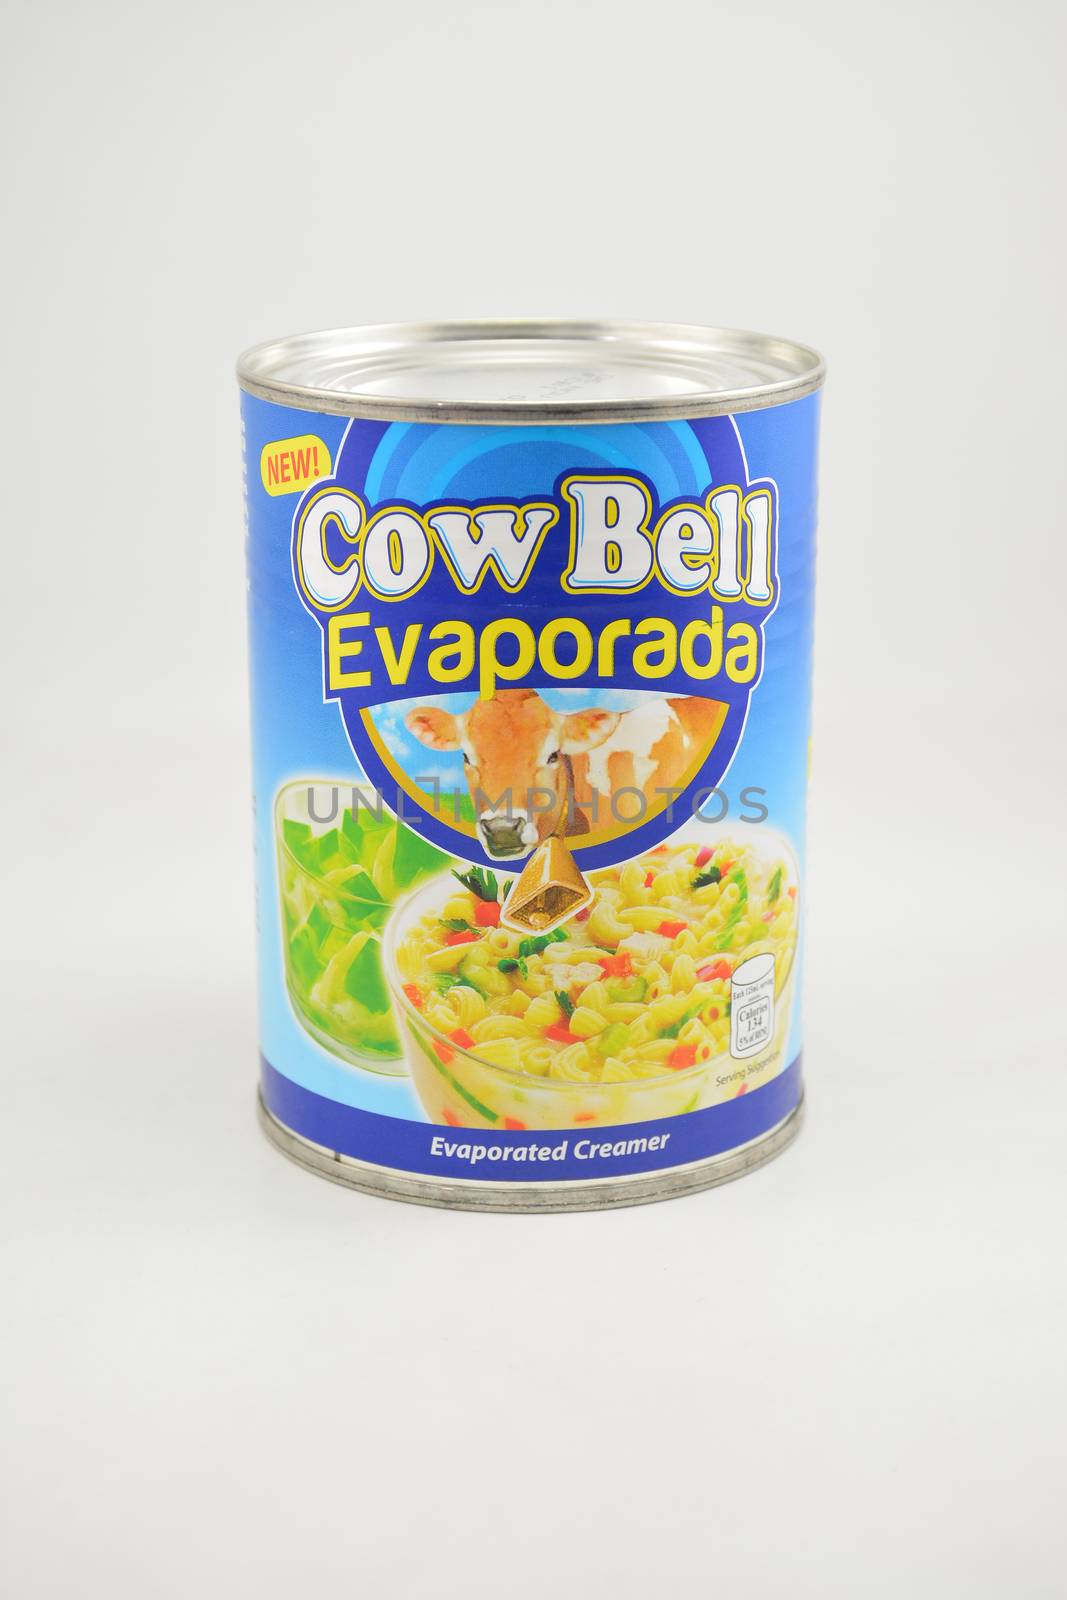 Cow bell evaporated milk can in Manila, Philippines by imwaltersy